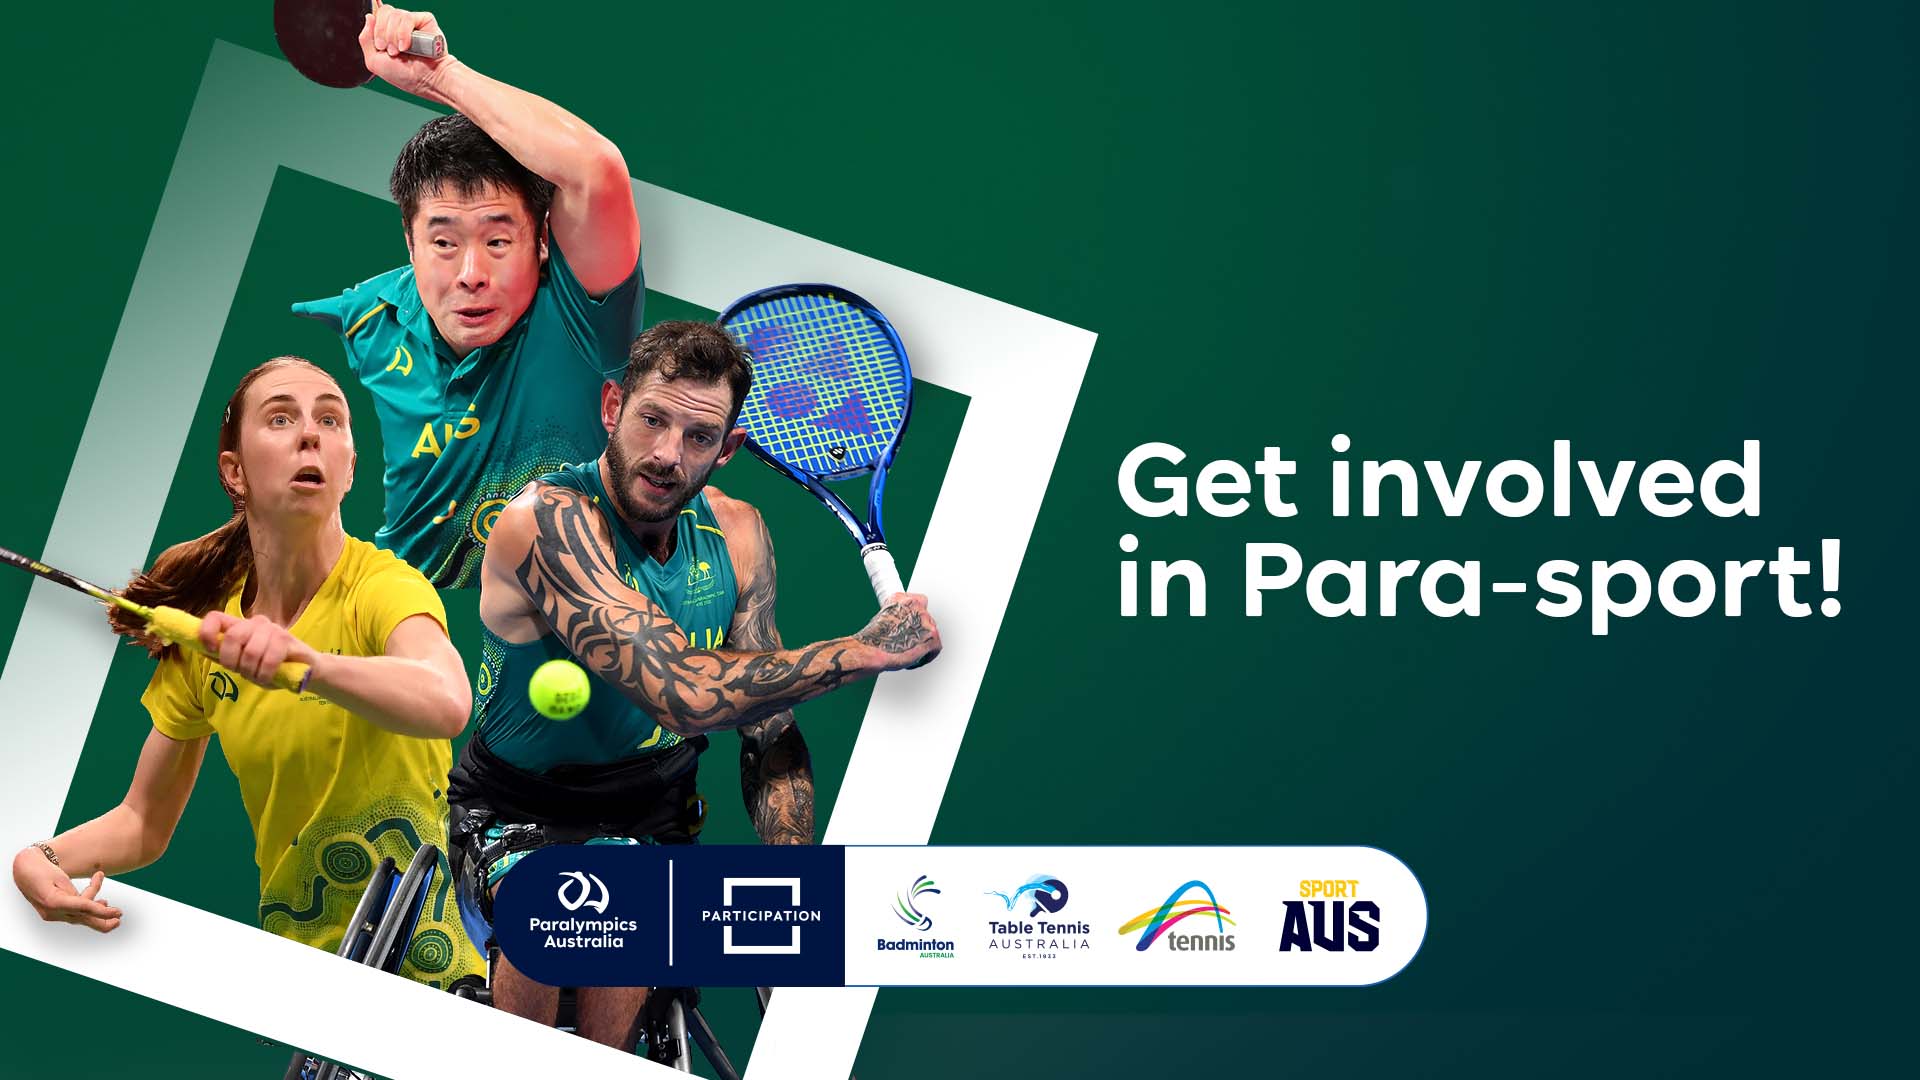 A dark green background with images of female Para-badminton athlete, male Para-table tennis player and male Wheelchair tennis player to the left. To the right is the text: Get invovled in Para-sport!